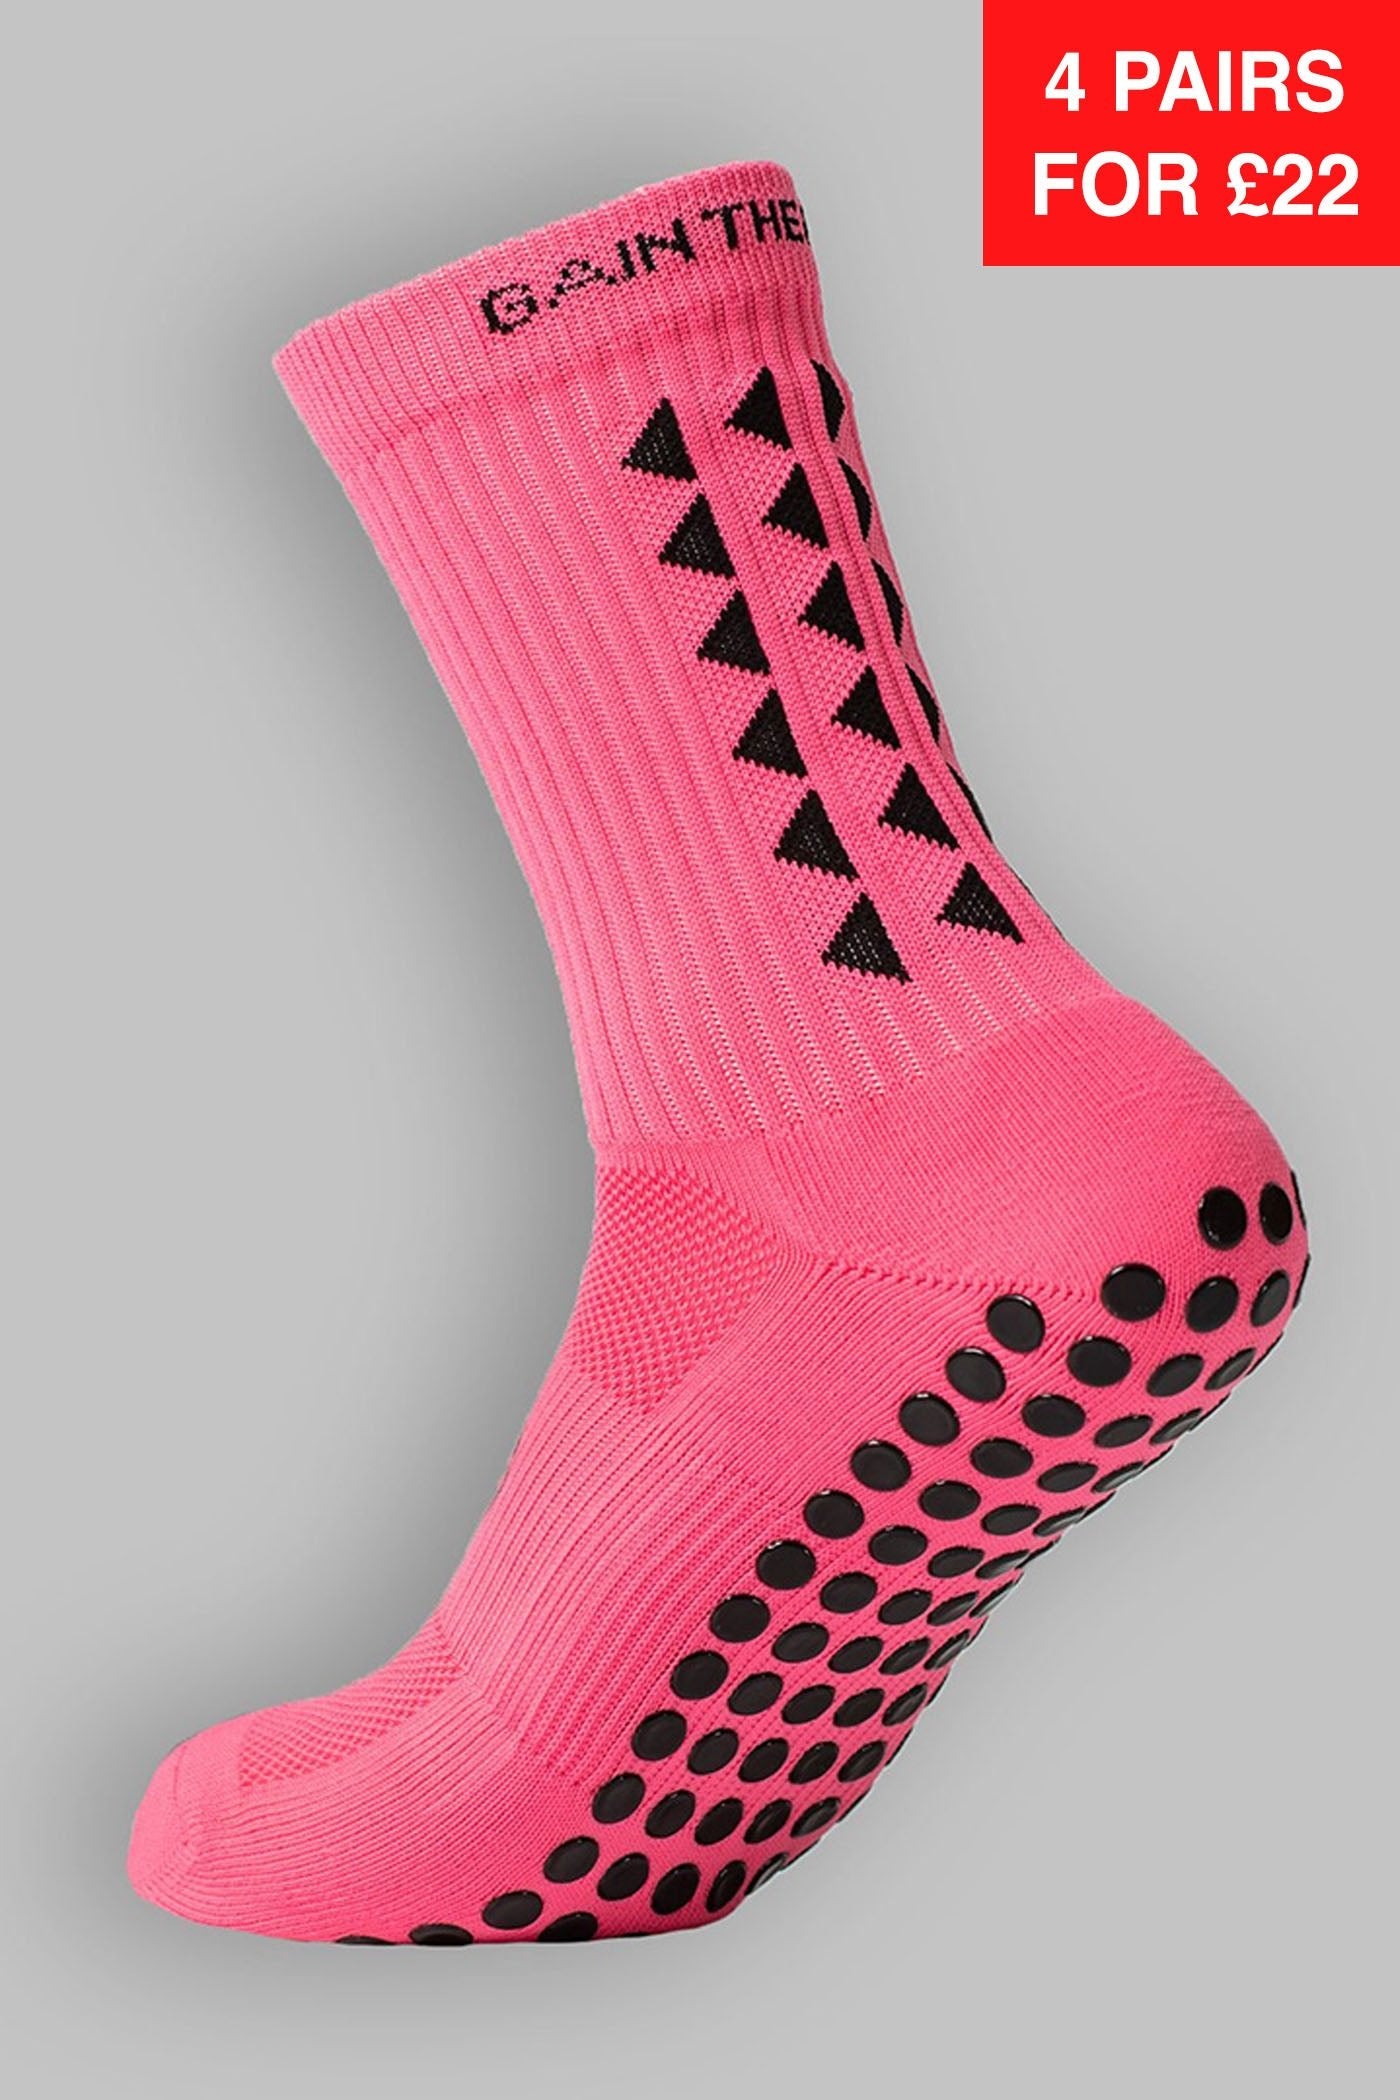 GRIP SOCKS 2.0  MidCalf Length - Pink - Gain The Edge Official